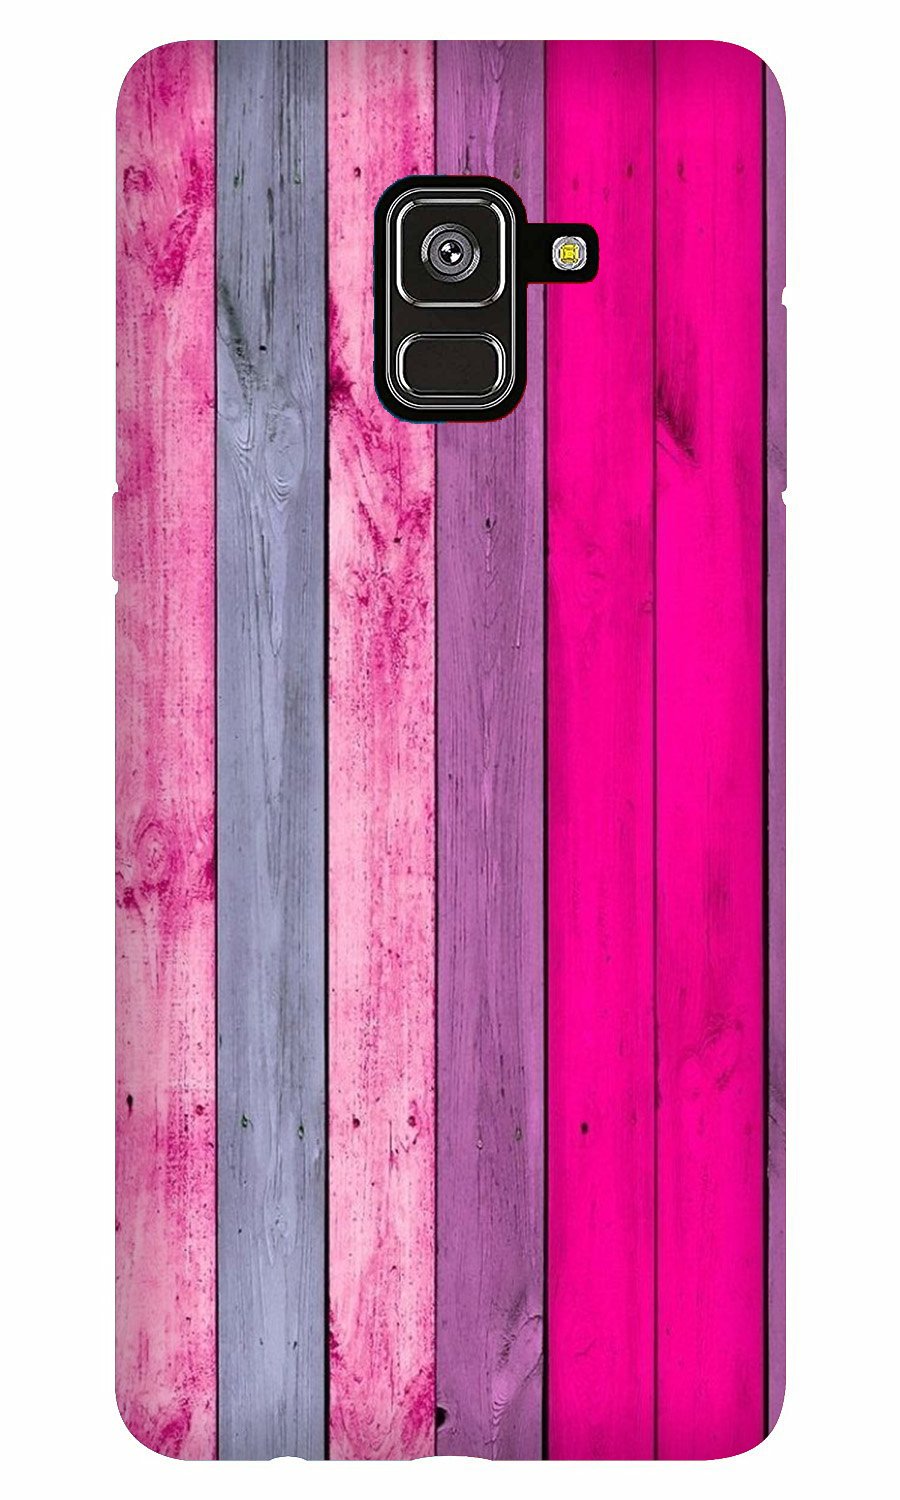 Wooden look Case for Galaxy A5 (2018)